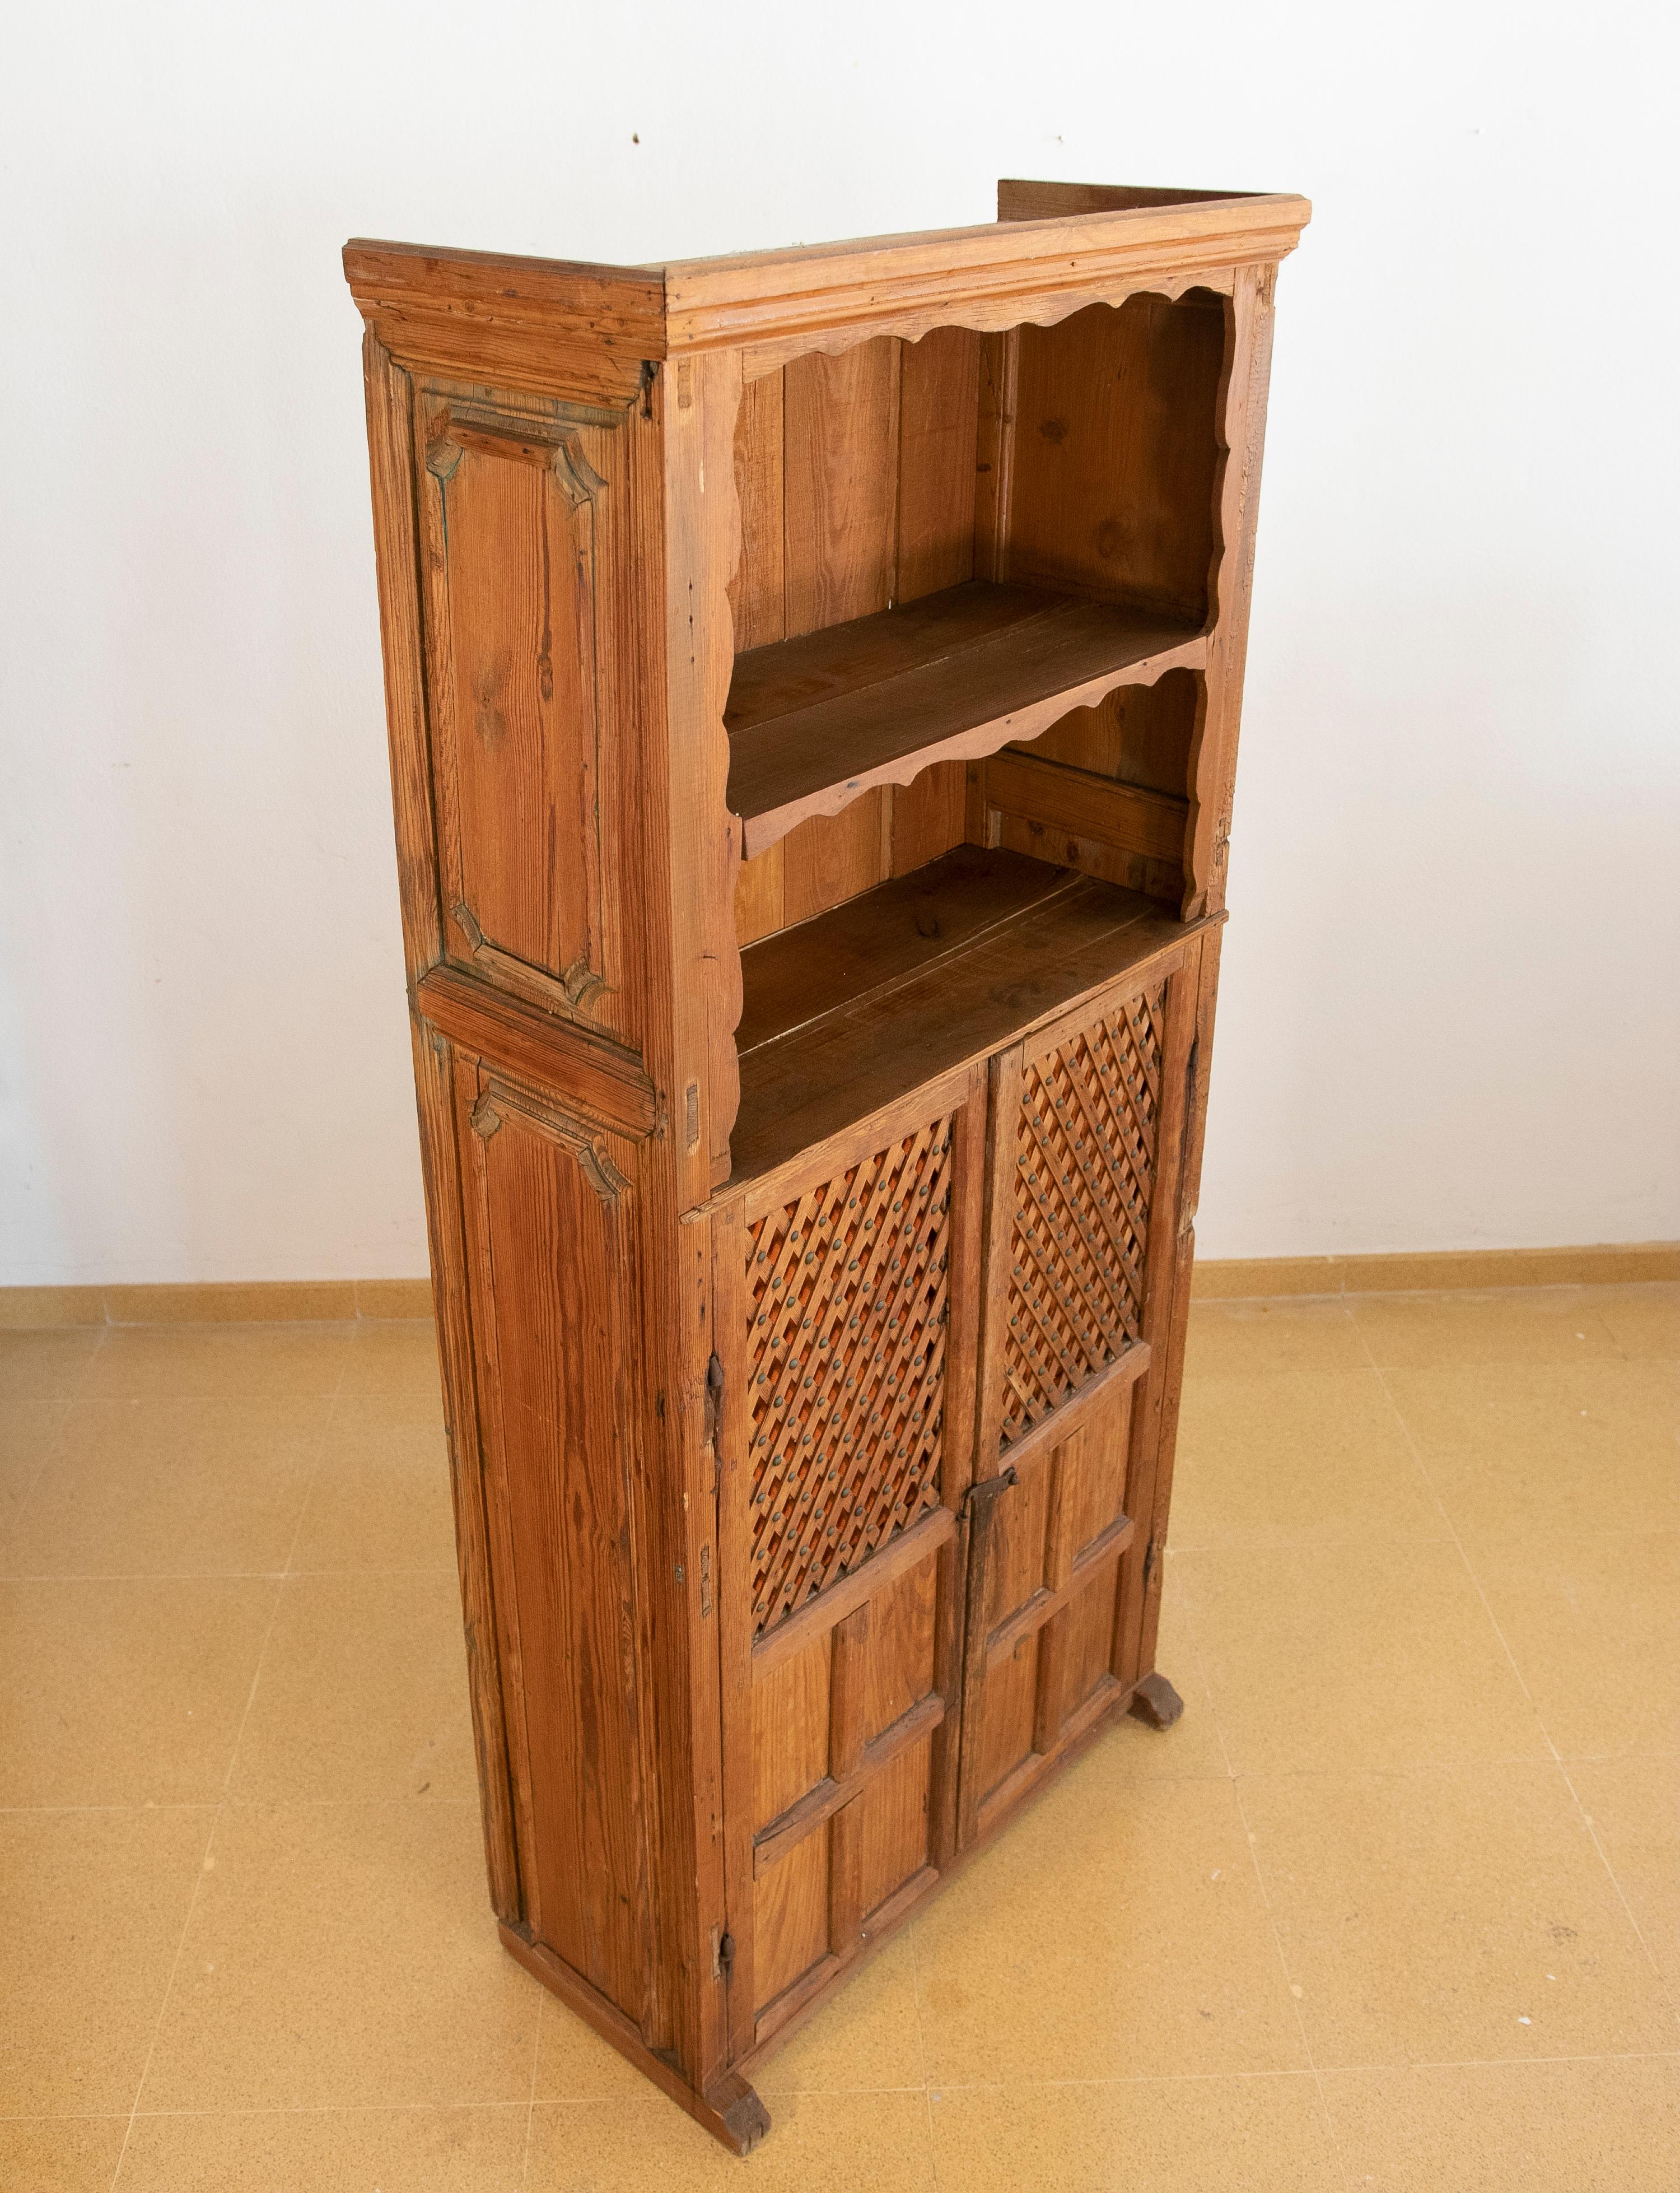 Spanish Wooden Cupboard with Shelves and Lattice Doors For Sale 13